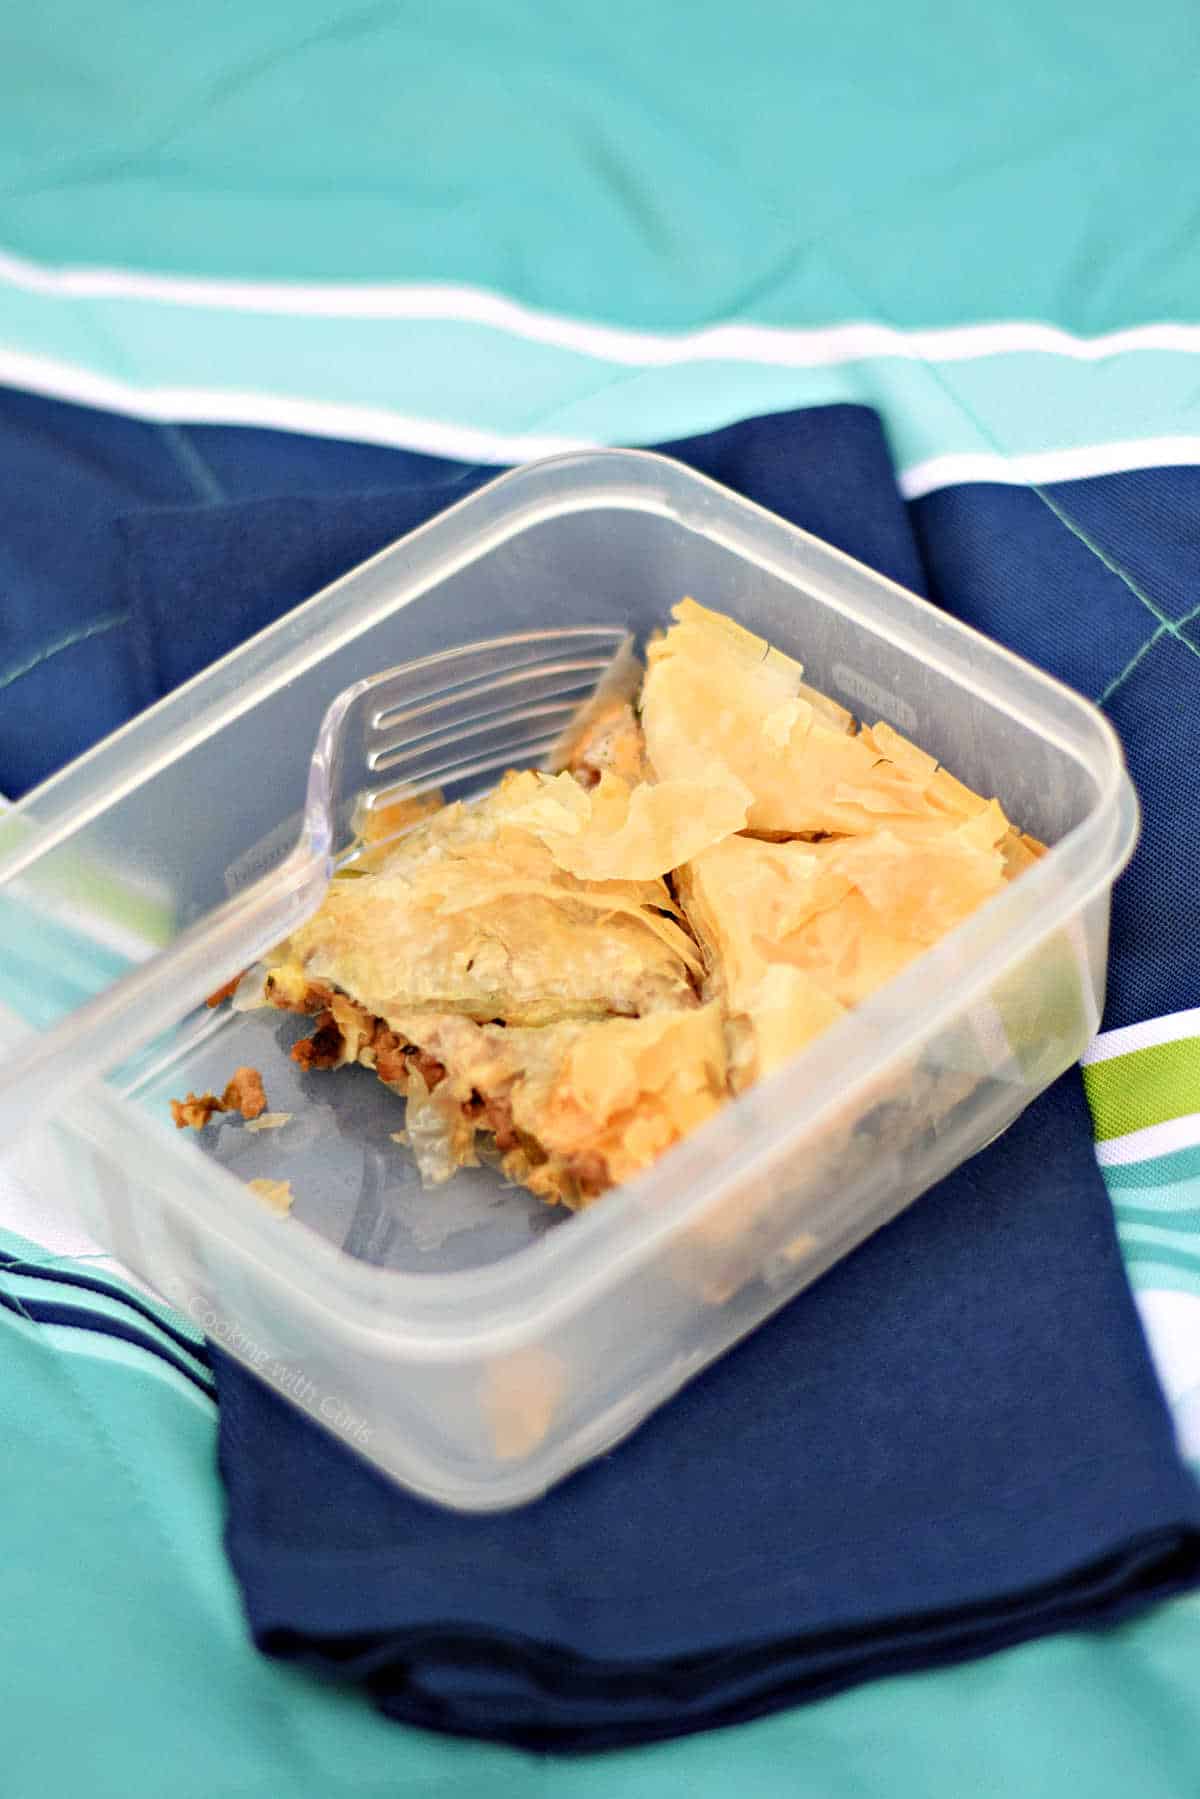 A piece of Greek phyllo meat pie in a plastic picnic container on a blue blanket.